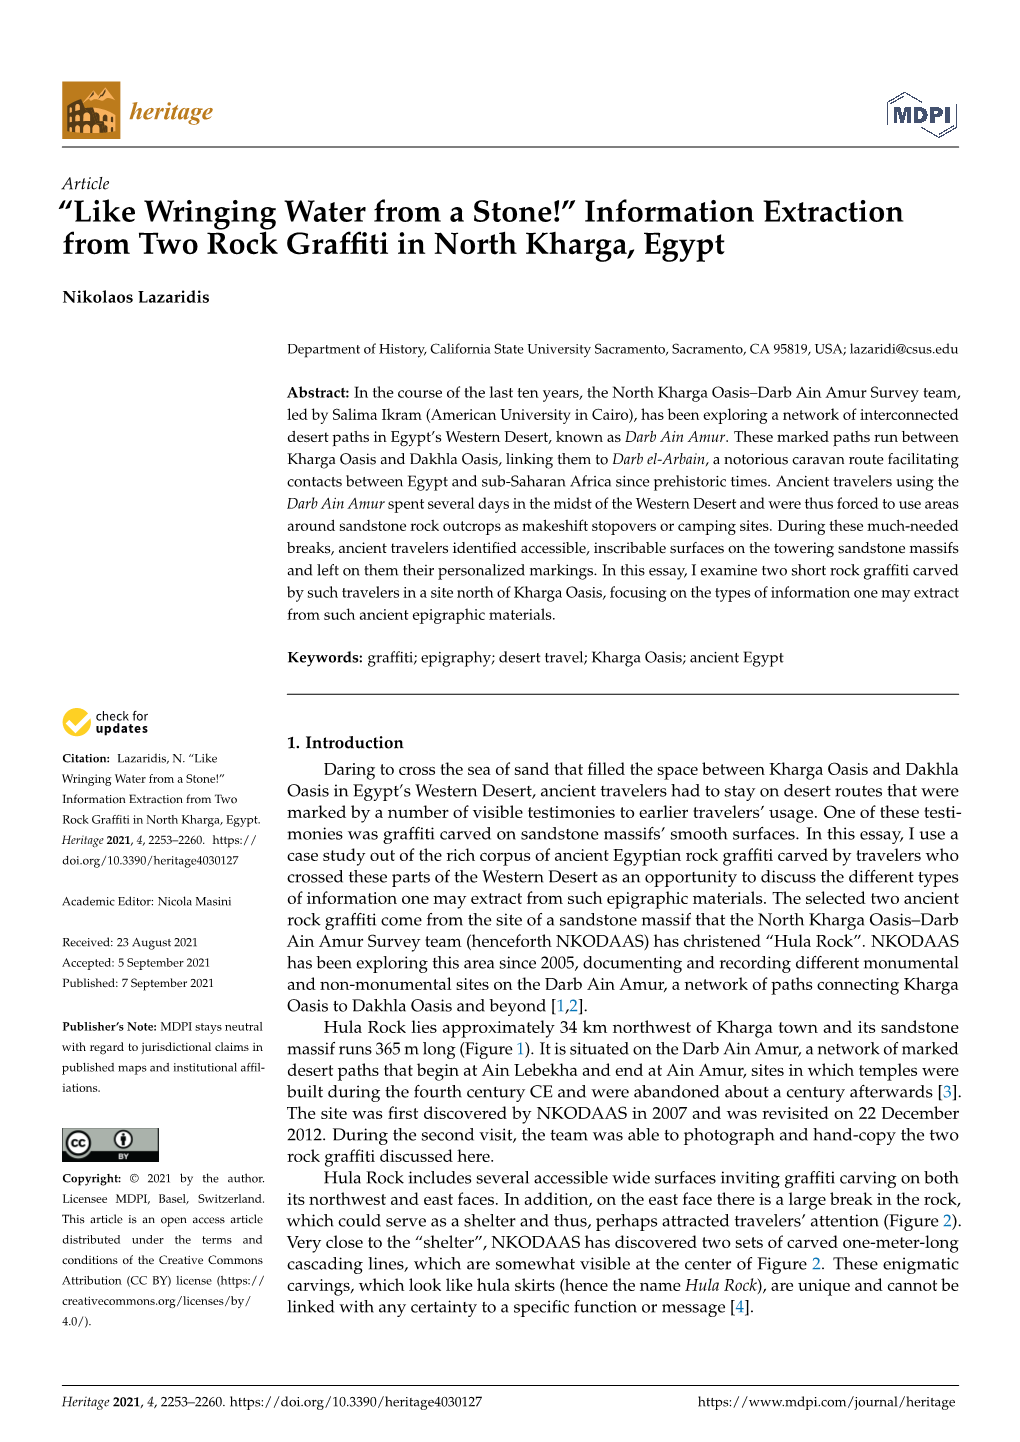 Information Extraction from Two Rock Graffiti in North Kharga, Egypt